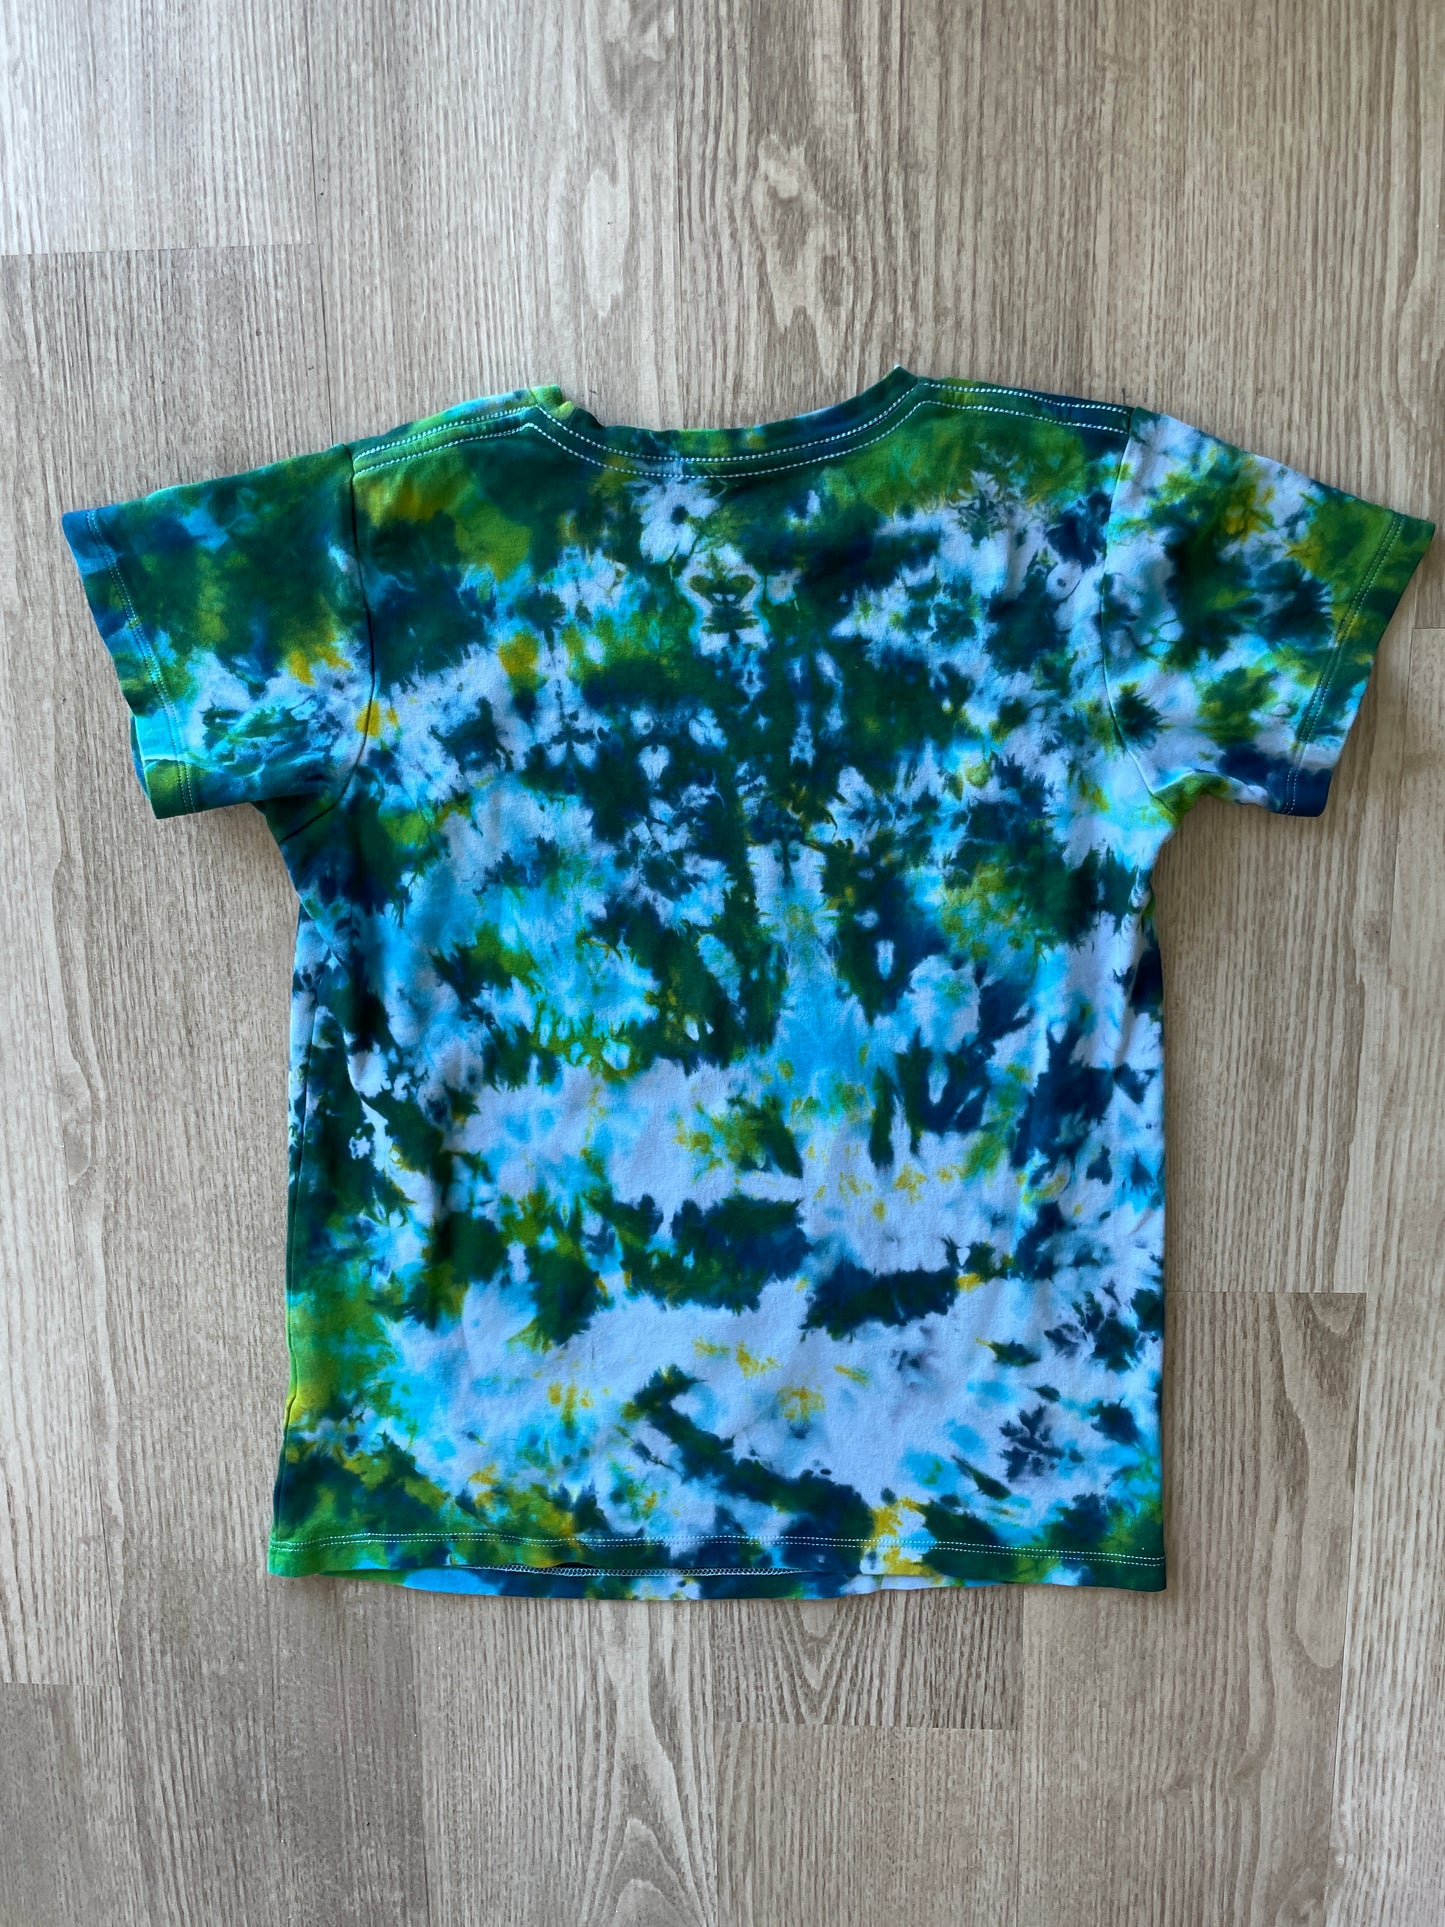 YOUTH SIZE 14 Rose Parks Trailblazer Handmade Tie Dye T-Shirt | One-Of-a-Kind Piccolina Blue and Green Short Sleeve